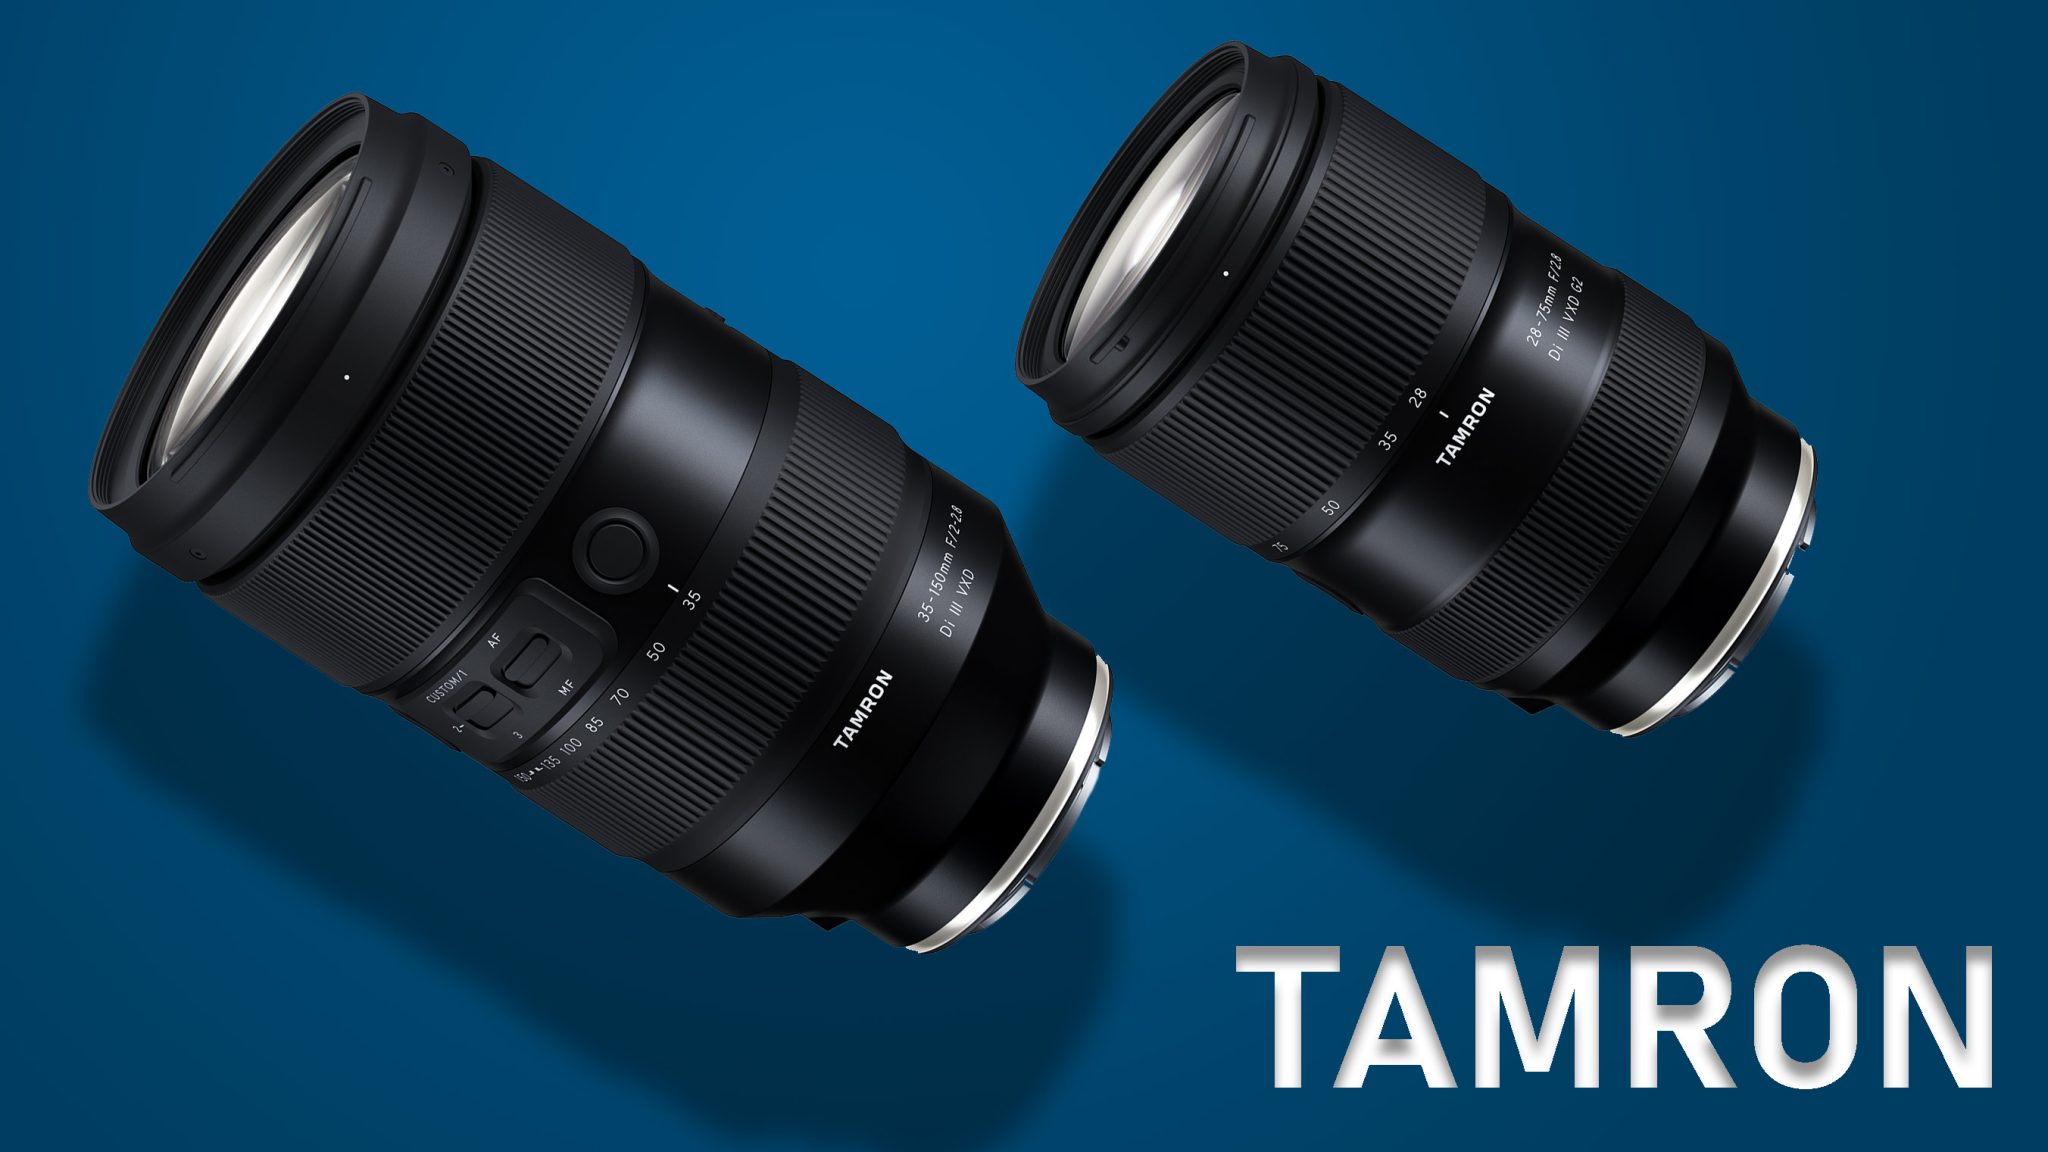 New Tamron Lenses: 35-150mm f/2-2.8 and 28-75mm f/2.8 G2 - Light And Matter